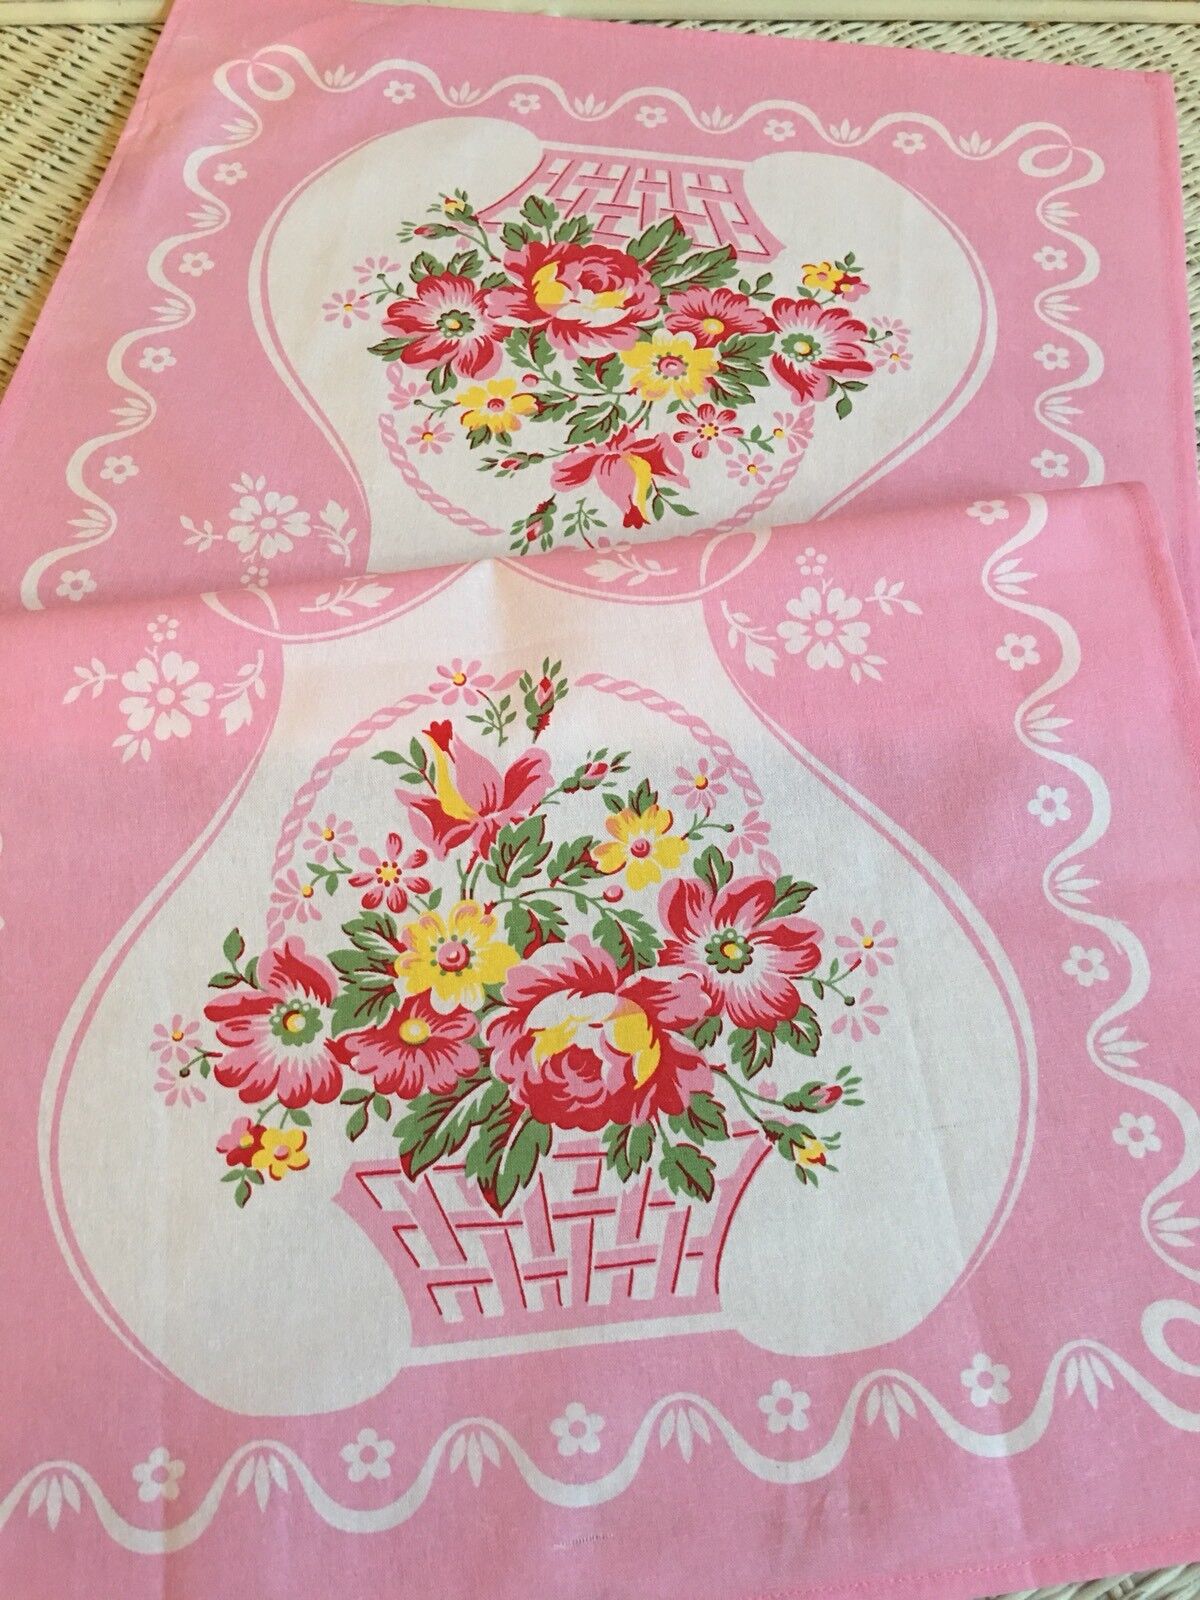 New LuRay Vintage Style Pretty Kitchen Tea Towel - Beautiful PINK Floral BASKET